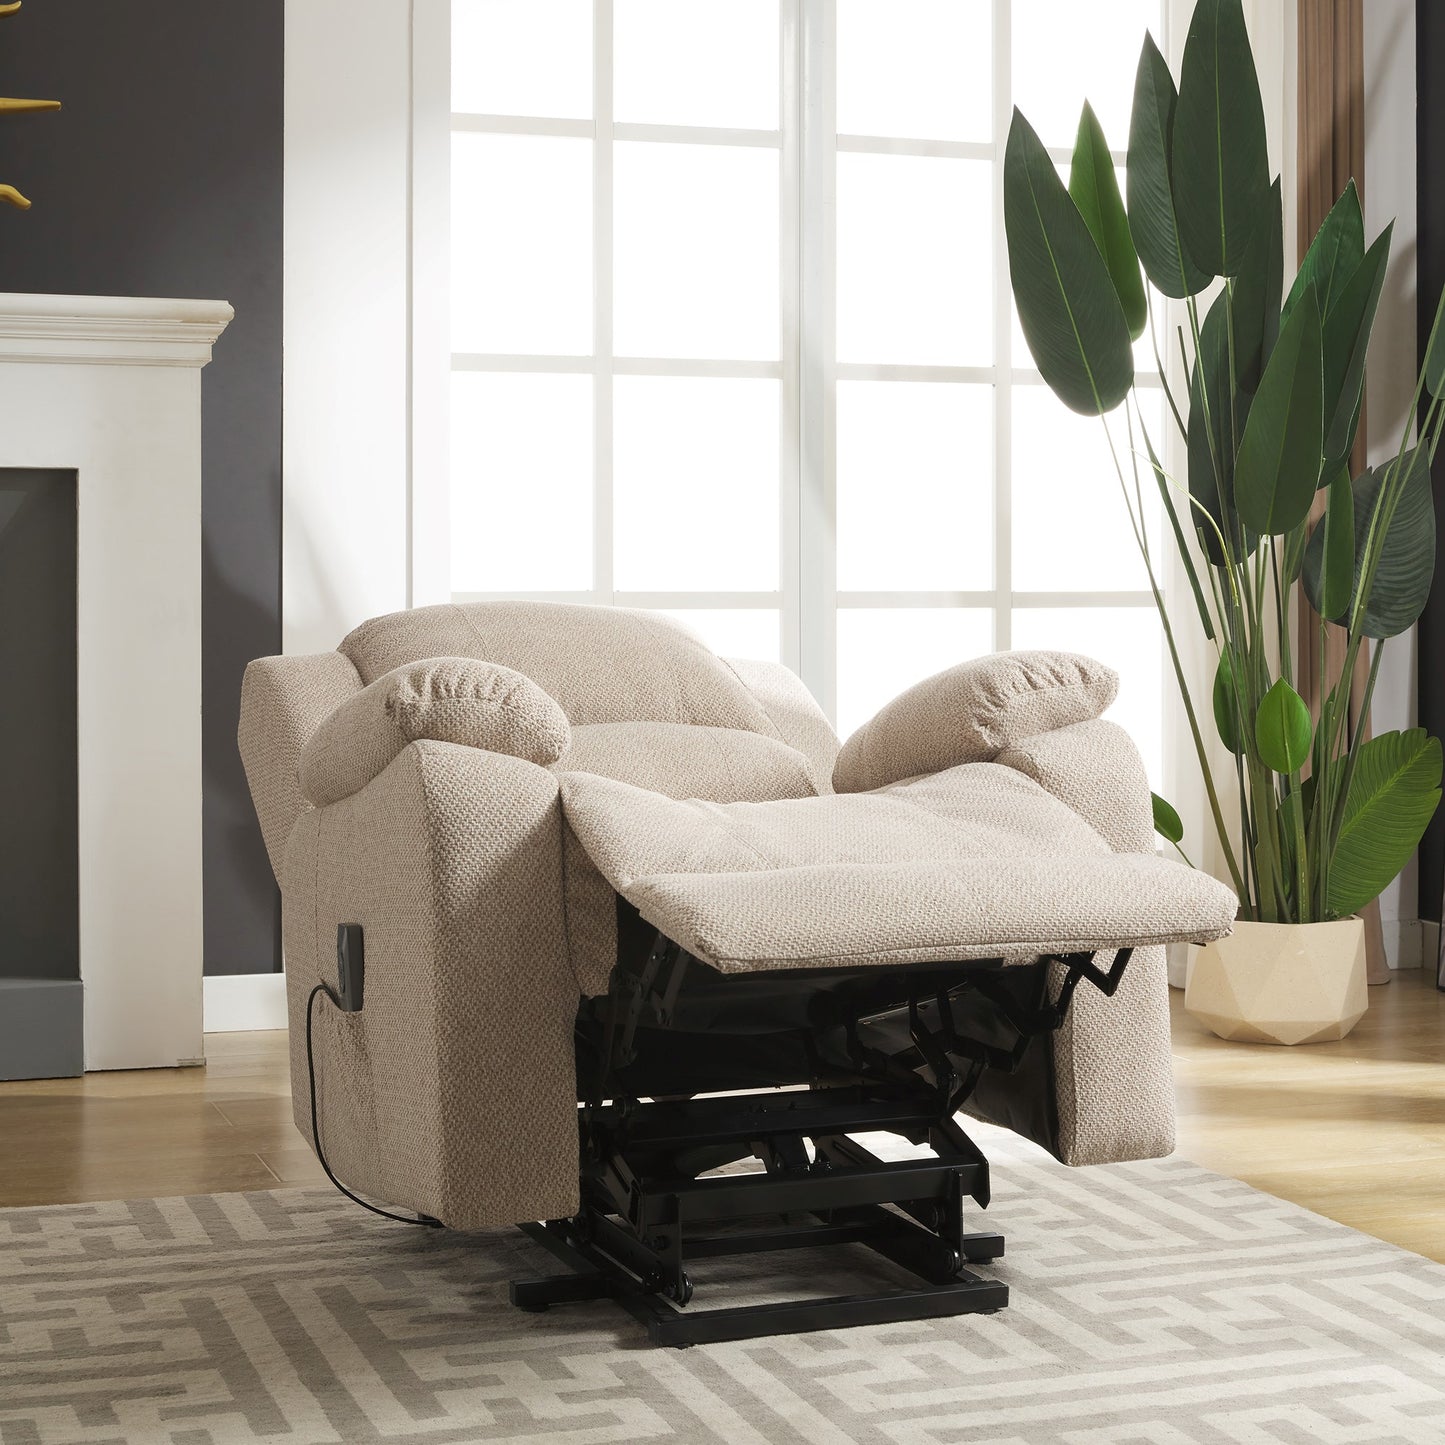 Westcott electric riser recliner with massage and heat